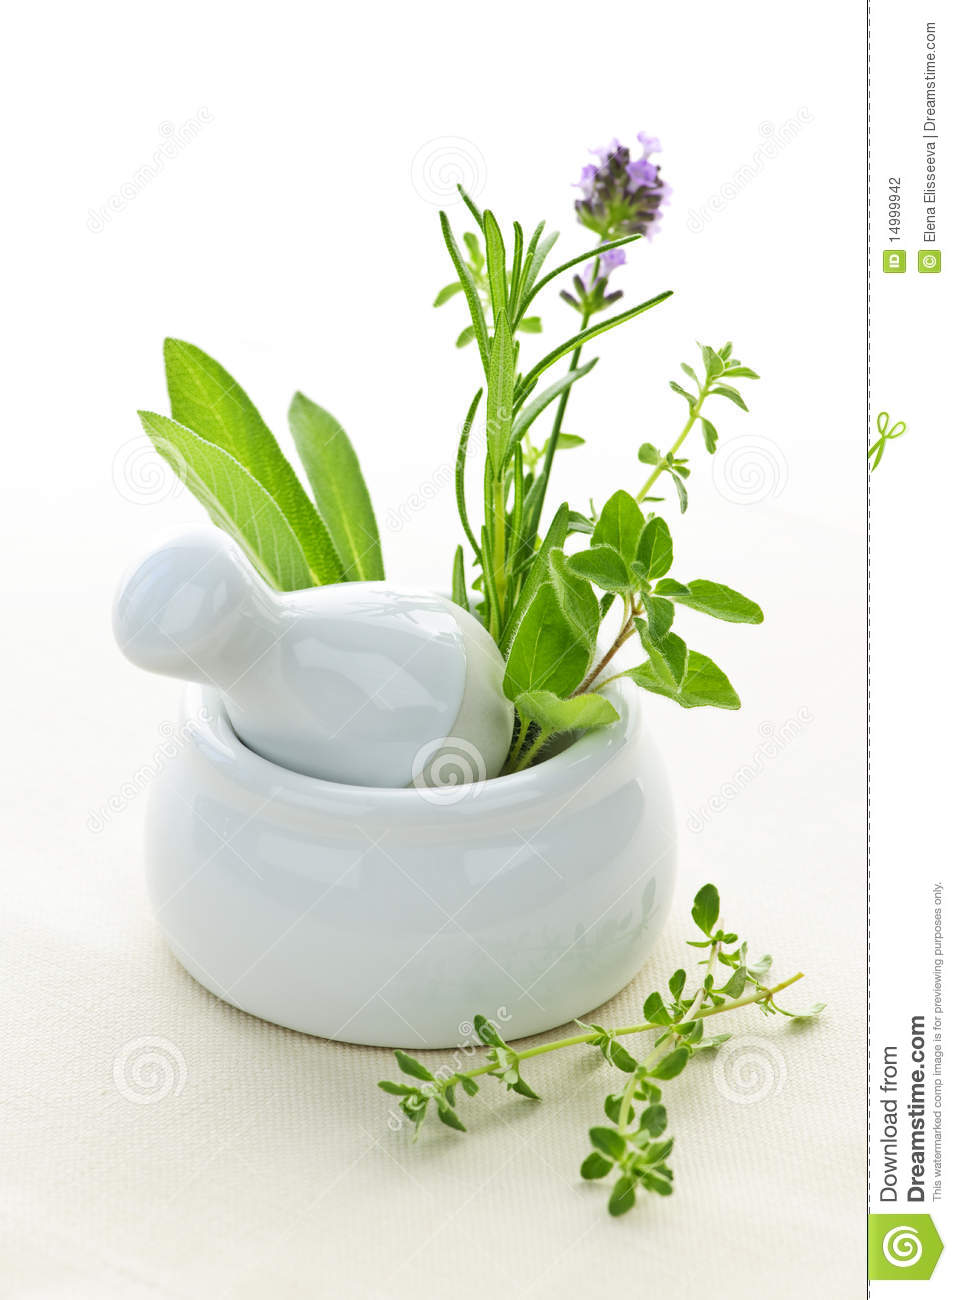 Healing Herbs In Mortar And Pestle Stock Photography   Image  14999942